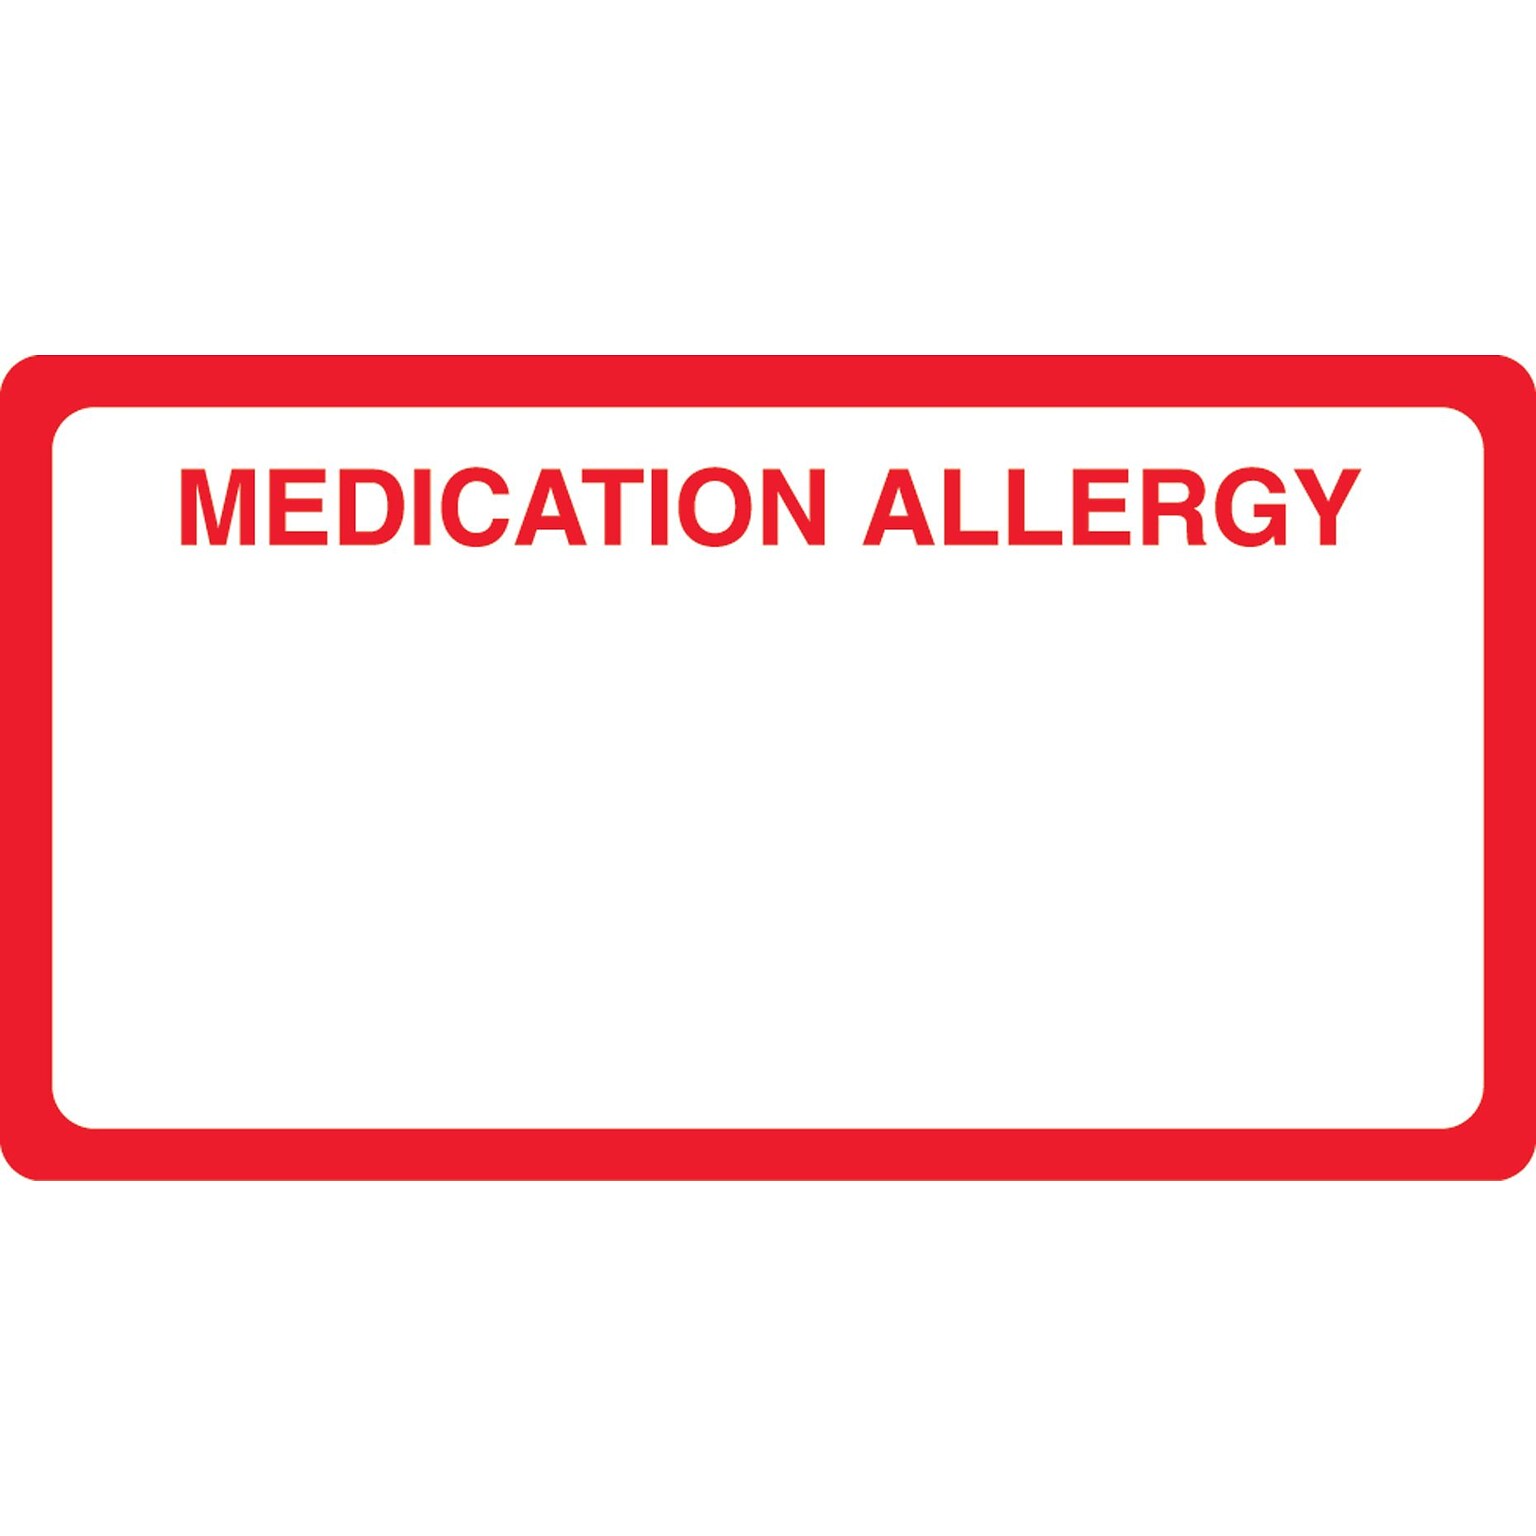 Medical Arts Press® Allergy Warning Medical Labels, Medication Allergy, Red and White, 1-3/4x3-1/4, 500 Labels